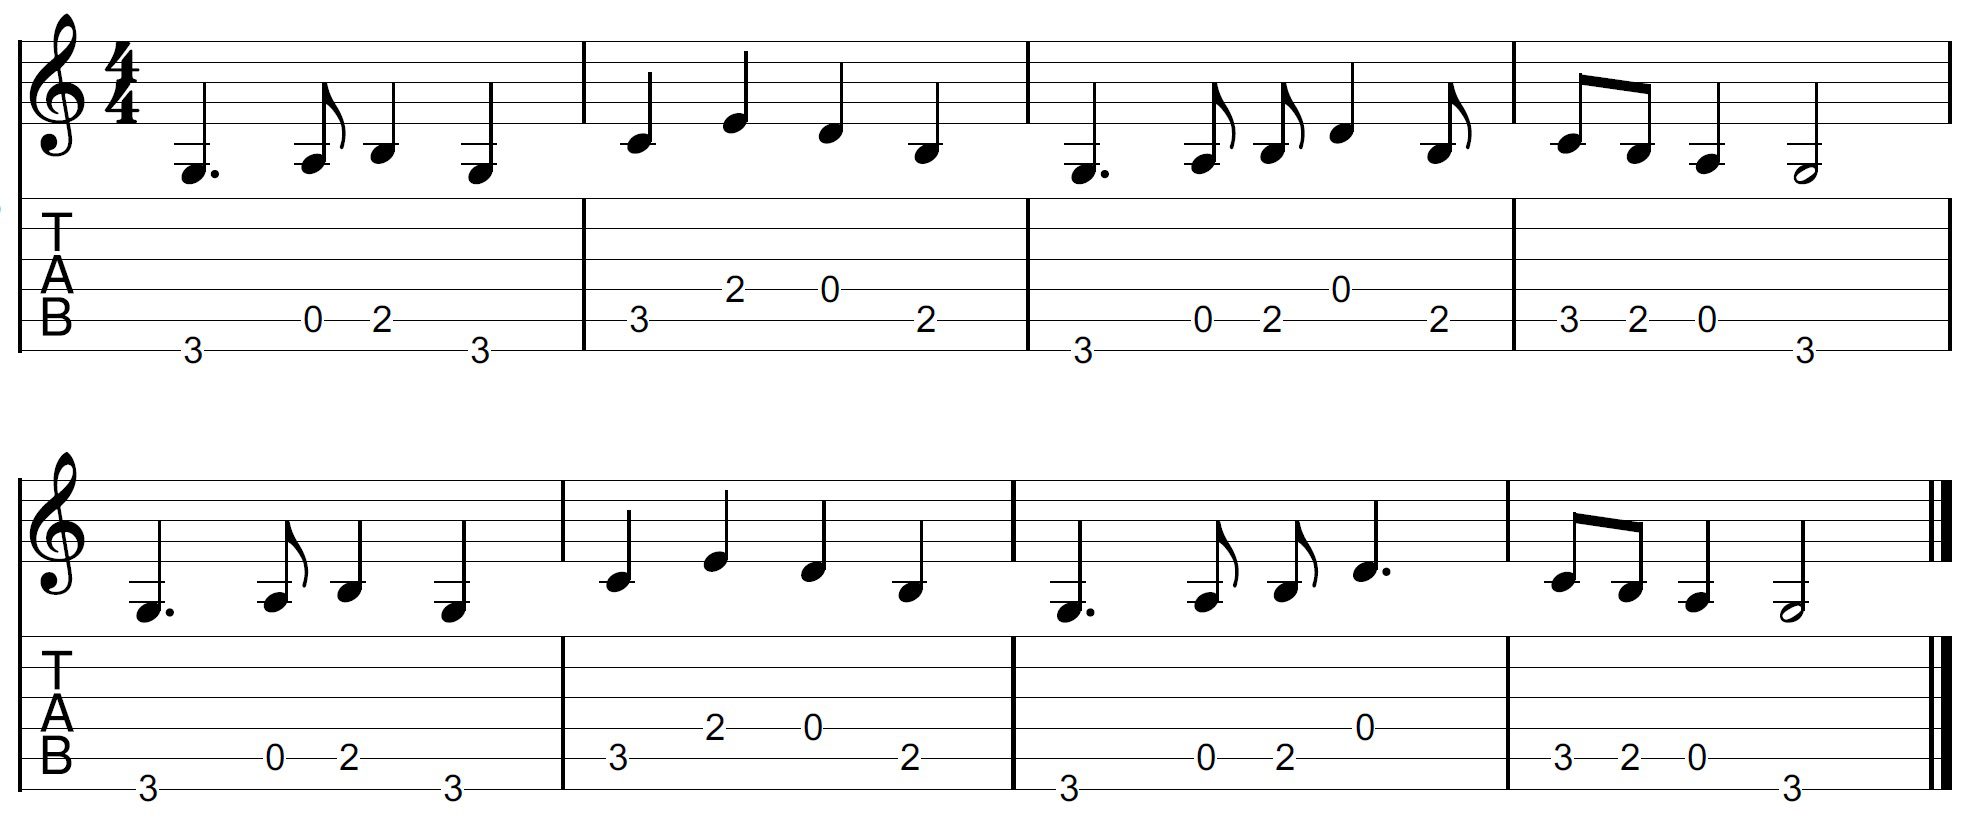 redemption song intro tab